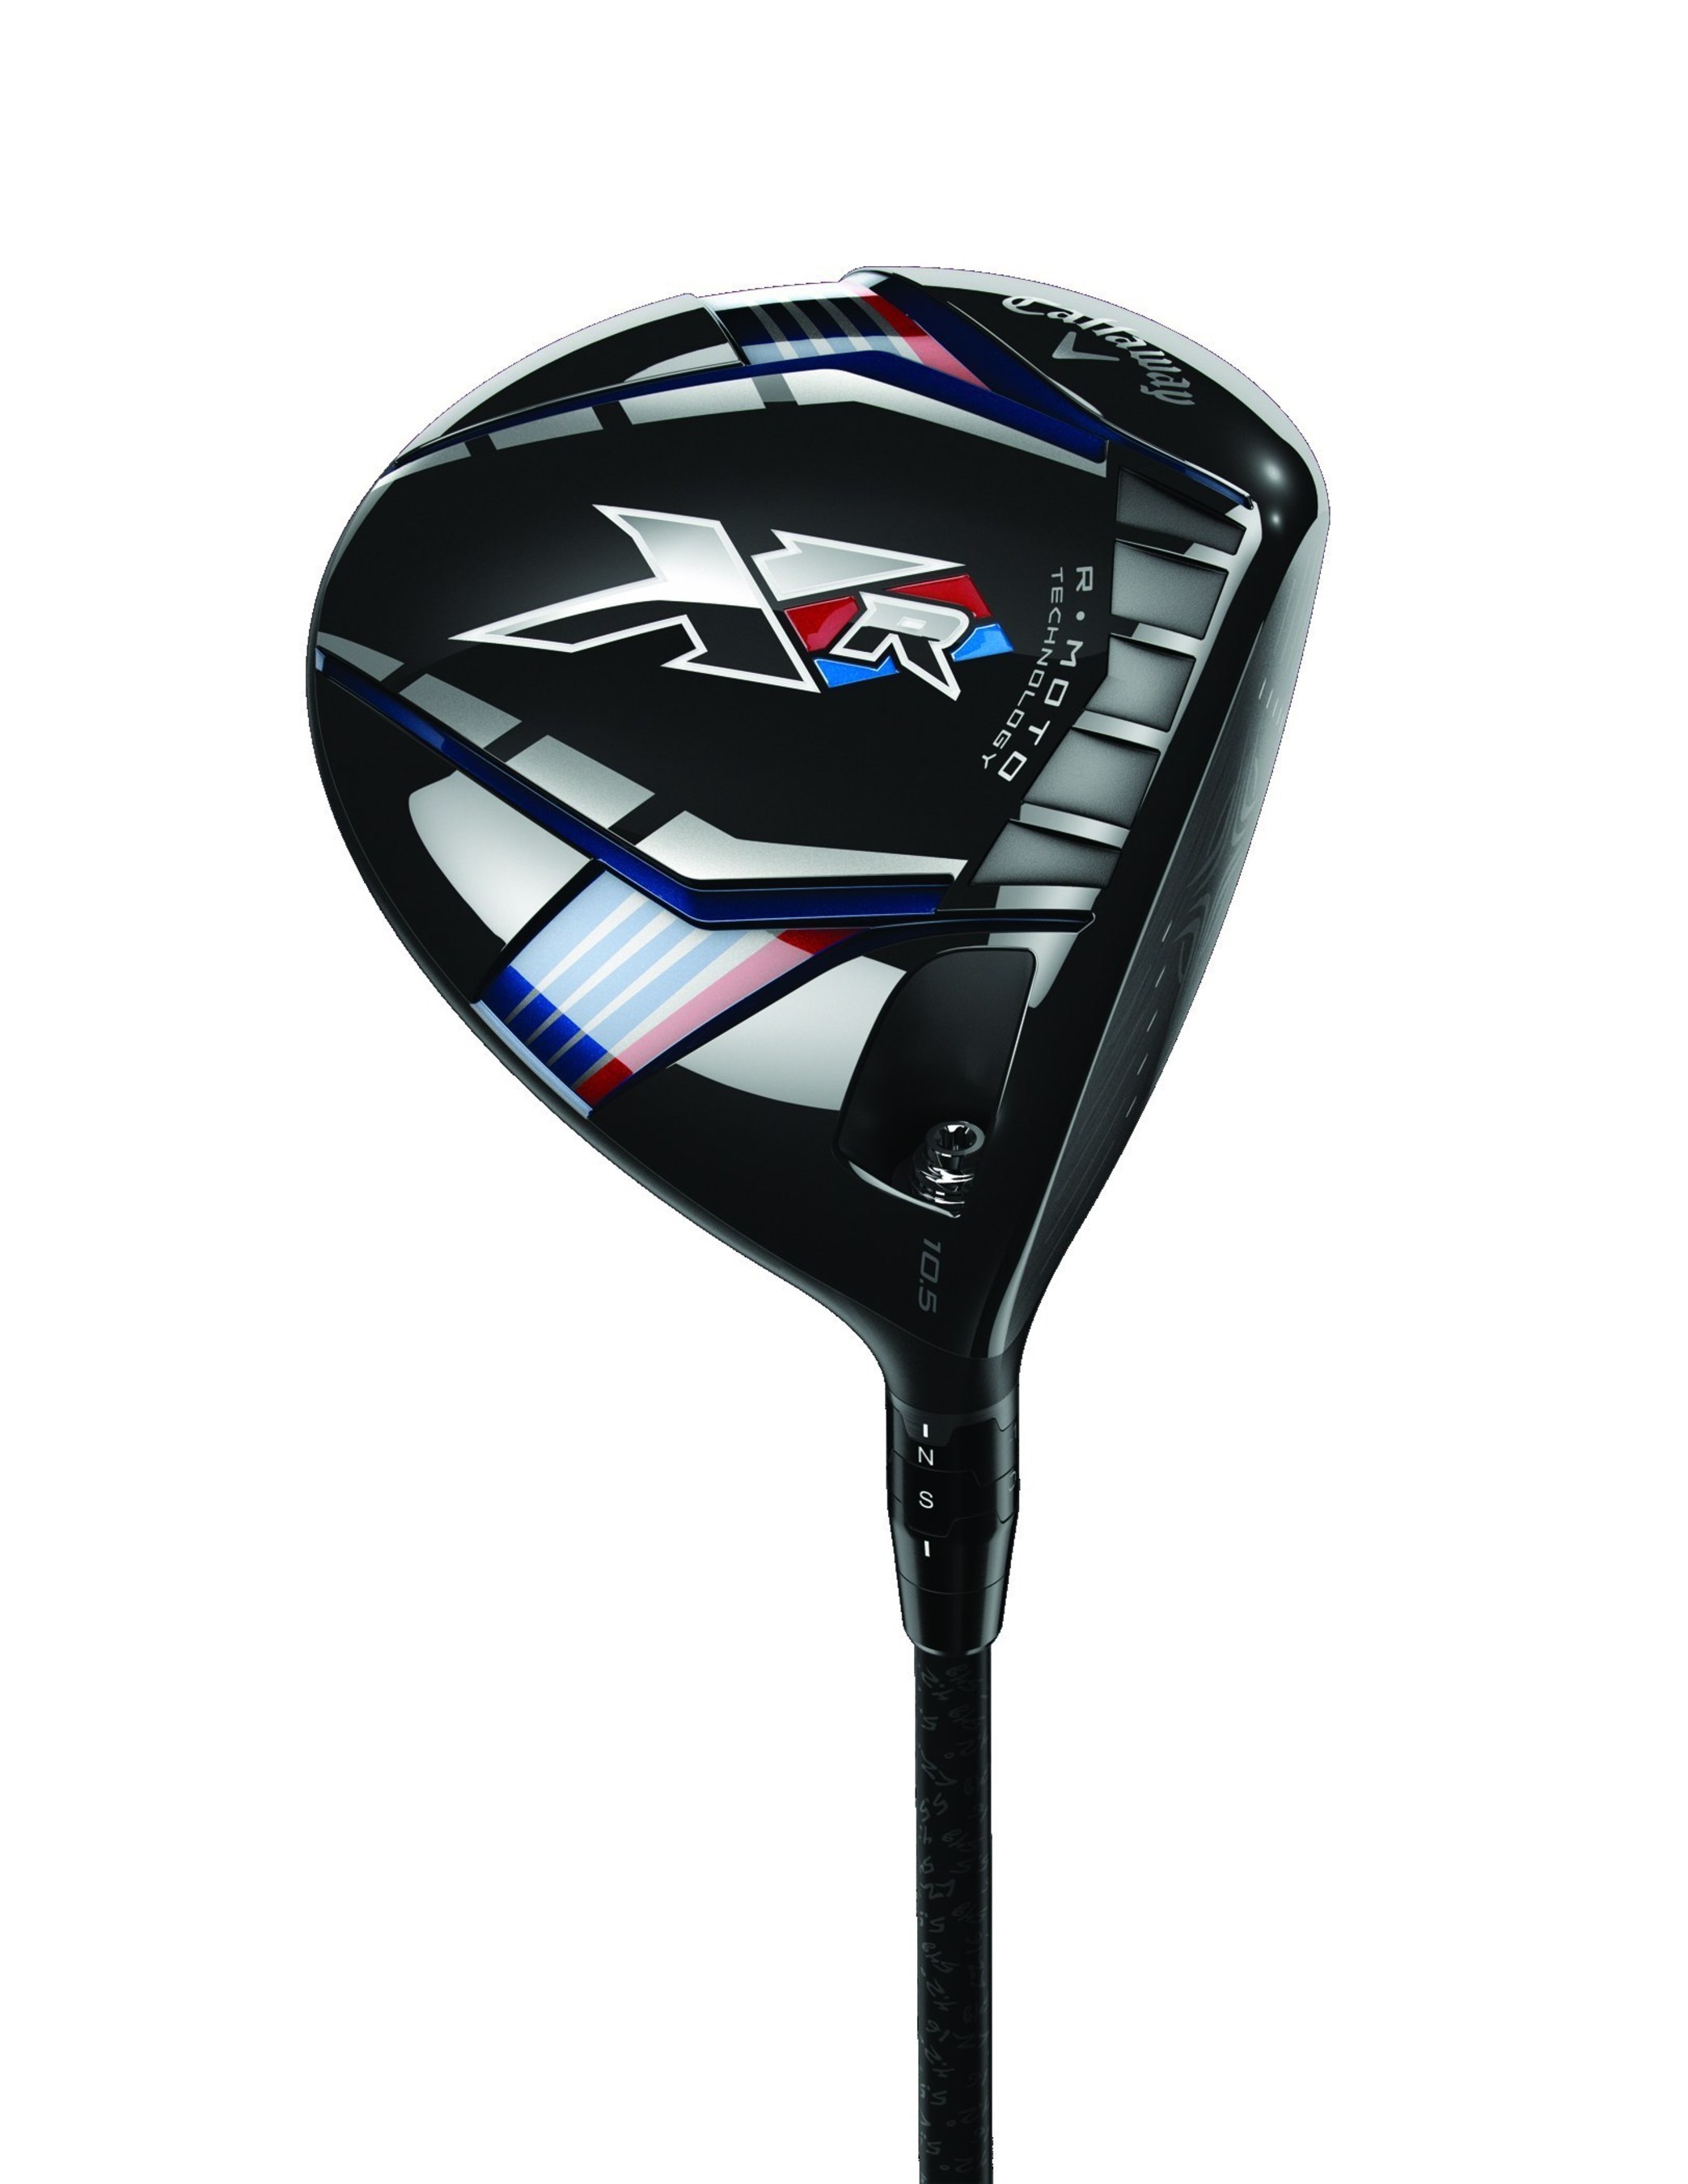 Callaway Golf Company today announced a new line of golf clubs built for outrageous speed: the XR Drivers, XR Fairway Woods, XR Hybrids and the XR Irons. The new clubs feature innovations in each product category that promote speed and power.